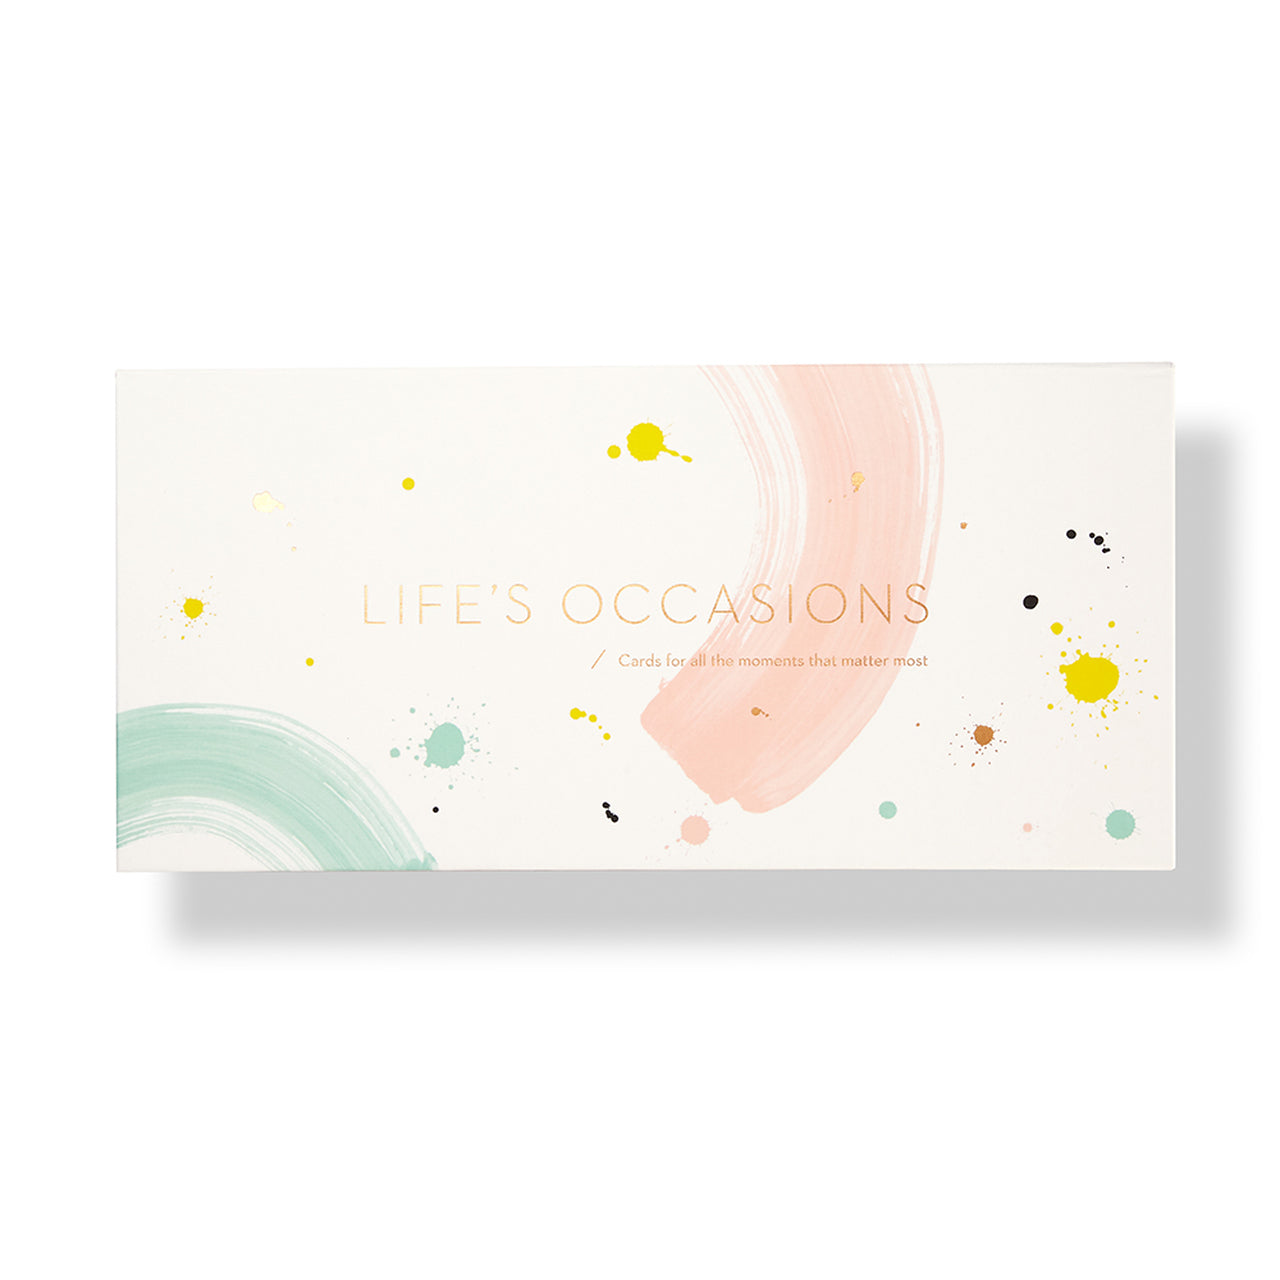 Life’s Occasions Note Card Kit